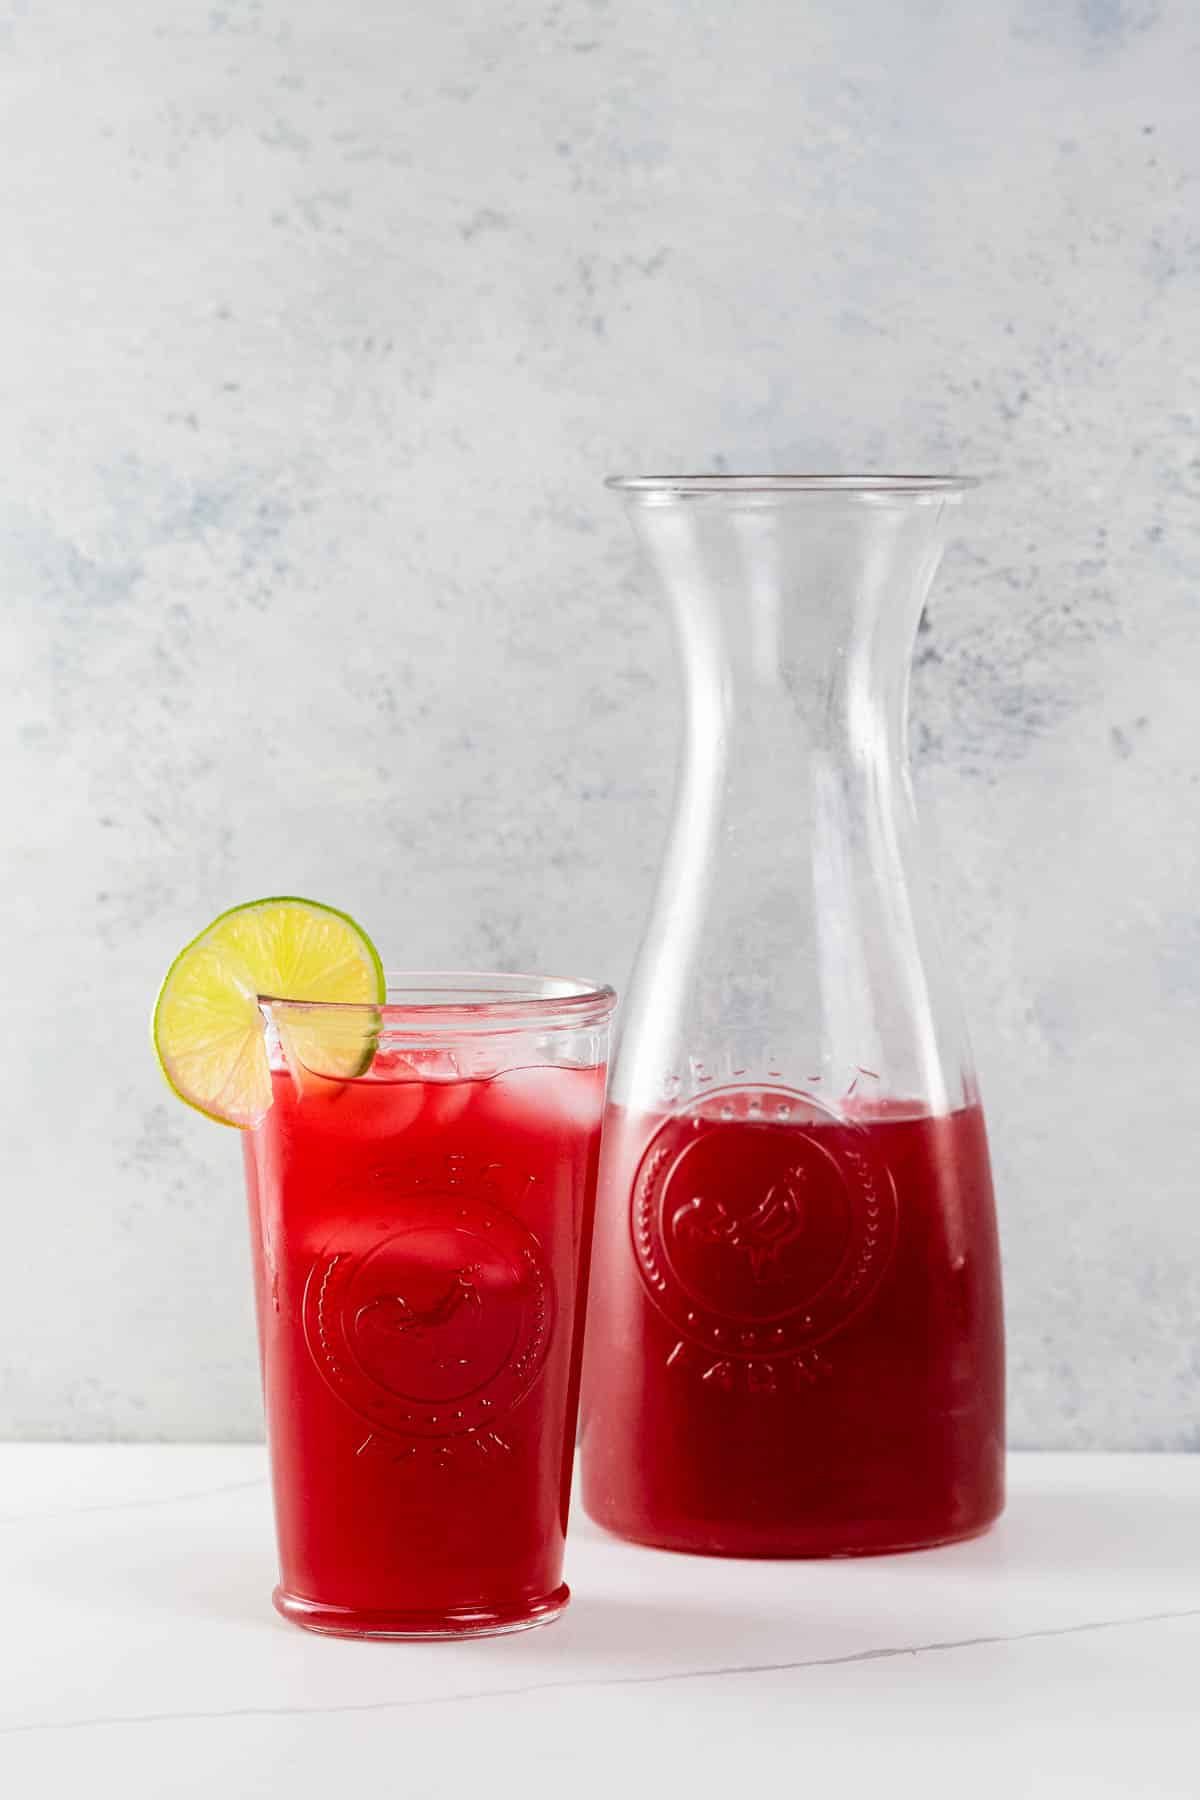 raspberry limeade in a carafe and in a glass garnished with a lime wheel